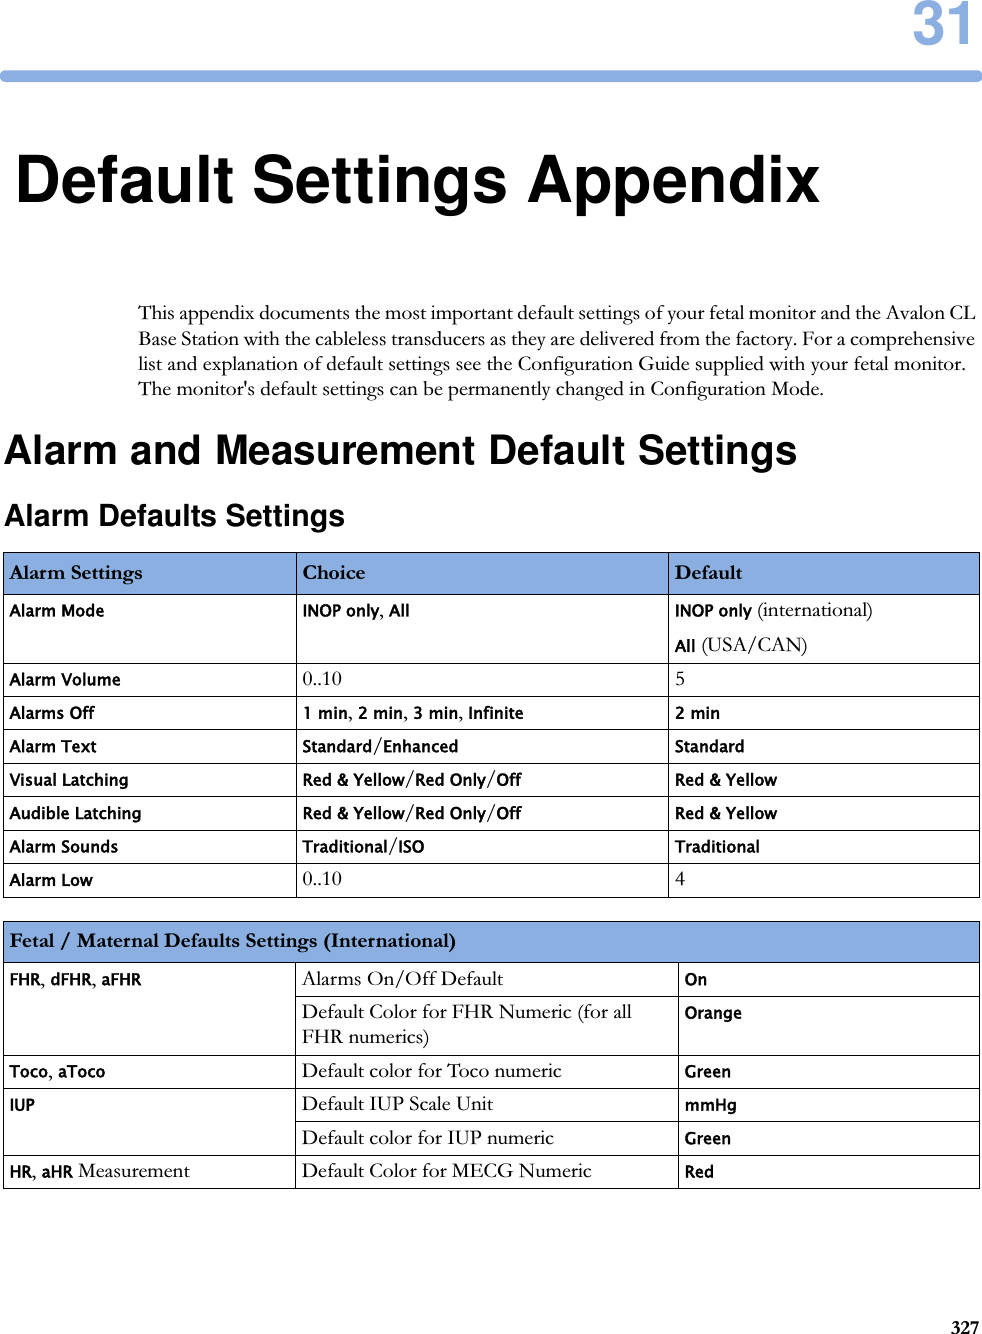 3132731Default Settings AppendixThis appendix documents the most important default settings of your fetal monitor and the Avalon CL Base Station with the cableless transducers as they are delivered from the factory. For a comprehensive list and explanation of default settings see the Configuration Guide supplied with your fetal monitor. The monitor&apos;s default settings can be permanently changed in Configuration Mode.Alarm and Measurement Default SettingsAlarm Defaults SettingsAlarm Settings Choice DefaultAlarm Mode INOP only, All INOP only (international)All (USA/CAN)Alarm Volume0..10 5Alarms Off 1 min, 2 min, 3 min, Infinite 2 minAlarm Text Standard/Enhanced StandardVisual Latching Red &amp; Yellow/Red Only/Off Red &amp; YellowAudible Latching Red &amp; Yellow/Red Only/Off Red &amp; YellowAlarm Sounds Traditional/ISO TraditionalAlarm Low0..10 4Fetal / Maternal Defaults Settings (International)FHR, dFHR, aFHRAlarms On/Off DefaultOnDefault Color for FHR Numeric (for all FHR numerics)OrangeToco, aTocoDefault color for Toco numericGreenIUPDefault IUP Scale UnitmmHgDefault color for IUP numericGreenHR, aHR Measurement Default Color for MECG NumericRed